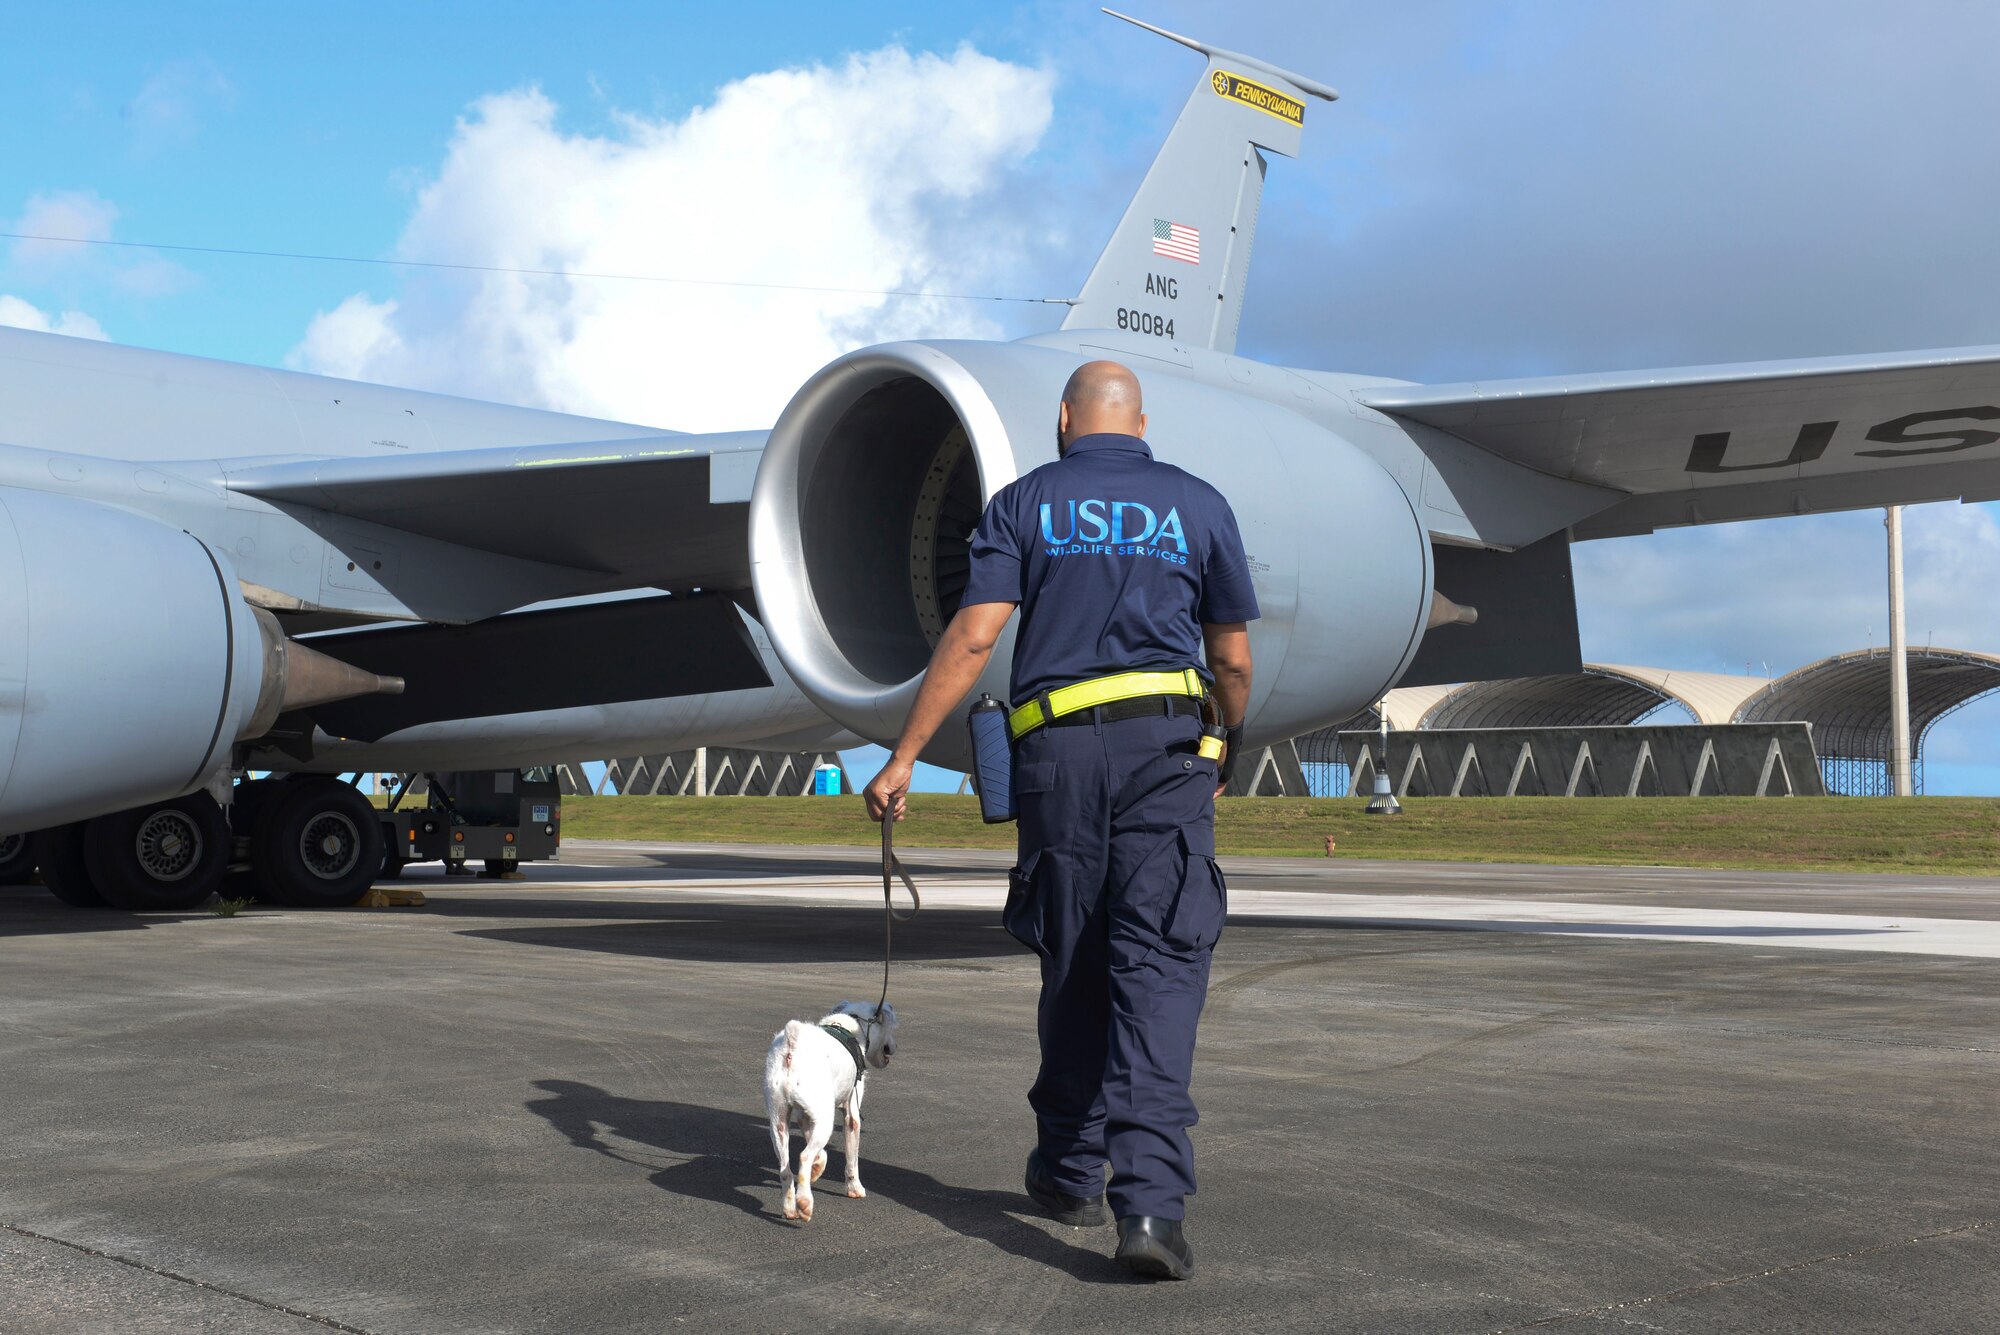 Tony Thompson, U.S. Department of Agriculture brown tree snake detector dog handler, and Striker, Striker, a USDA brown tree snake detector dog, inspect an aircraft prior to departure April 30, 2015, at Andersen Air Force Base, Guam. With the utilization of the 17 active detector dog teams and 4,000 traps, the USDA has helped significantly prevent the spread of the brown tree snakes. (U.S. Air Force photo by Senior Airman Katrina M. Brisbin/Released)